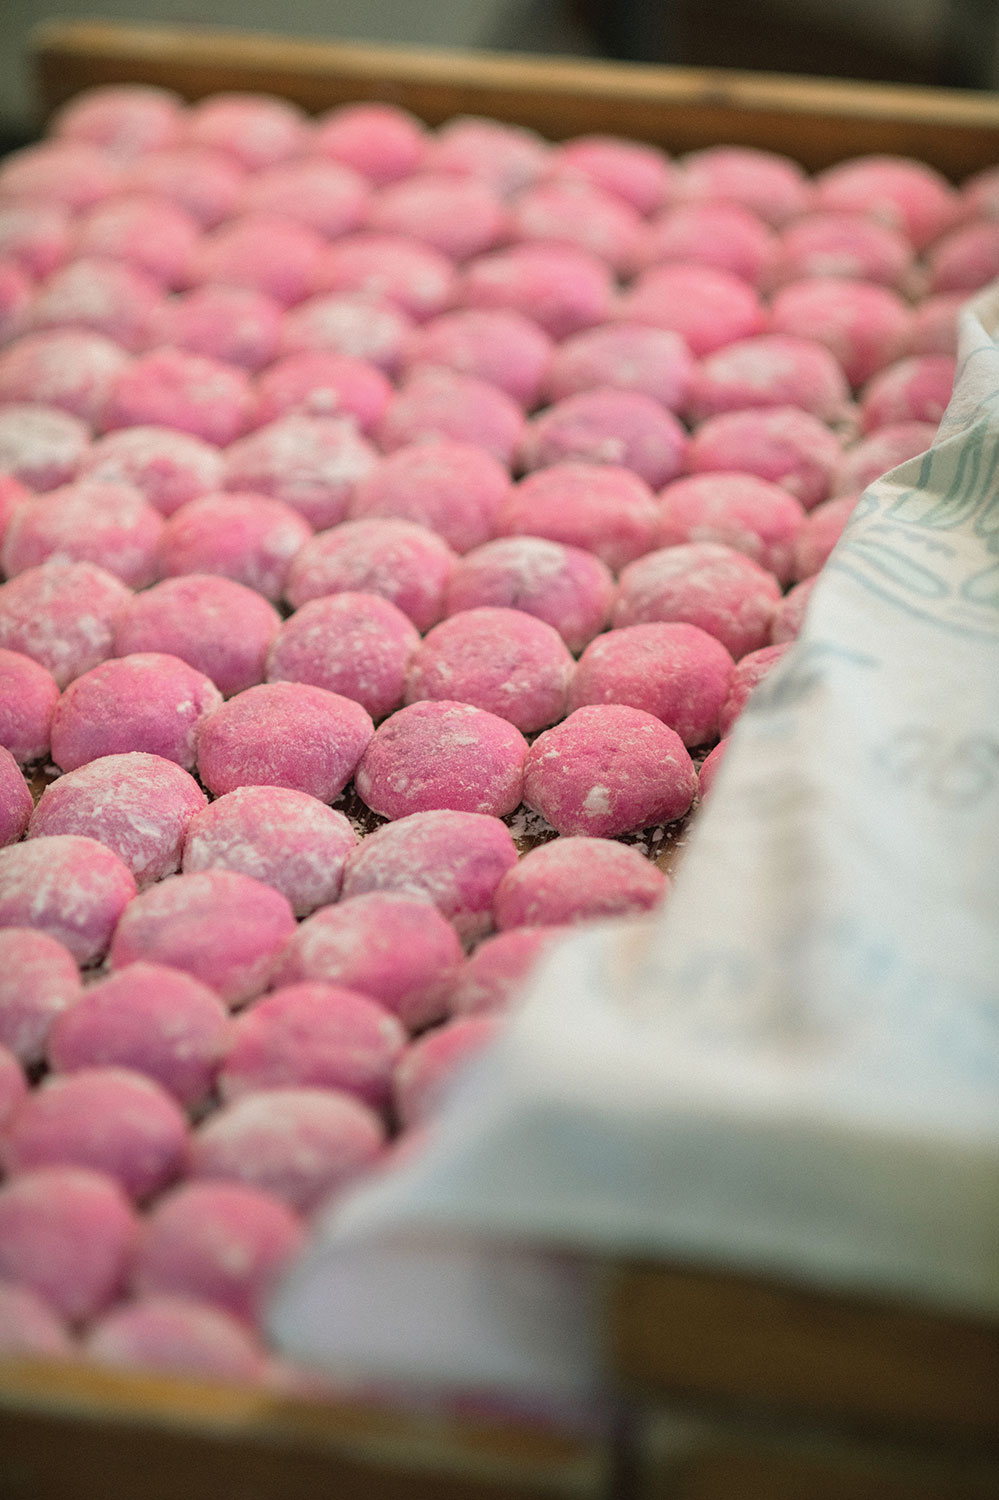 Pink colored mochi in rows.